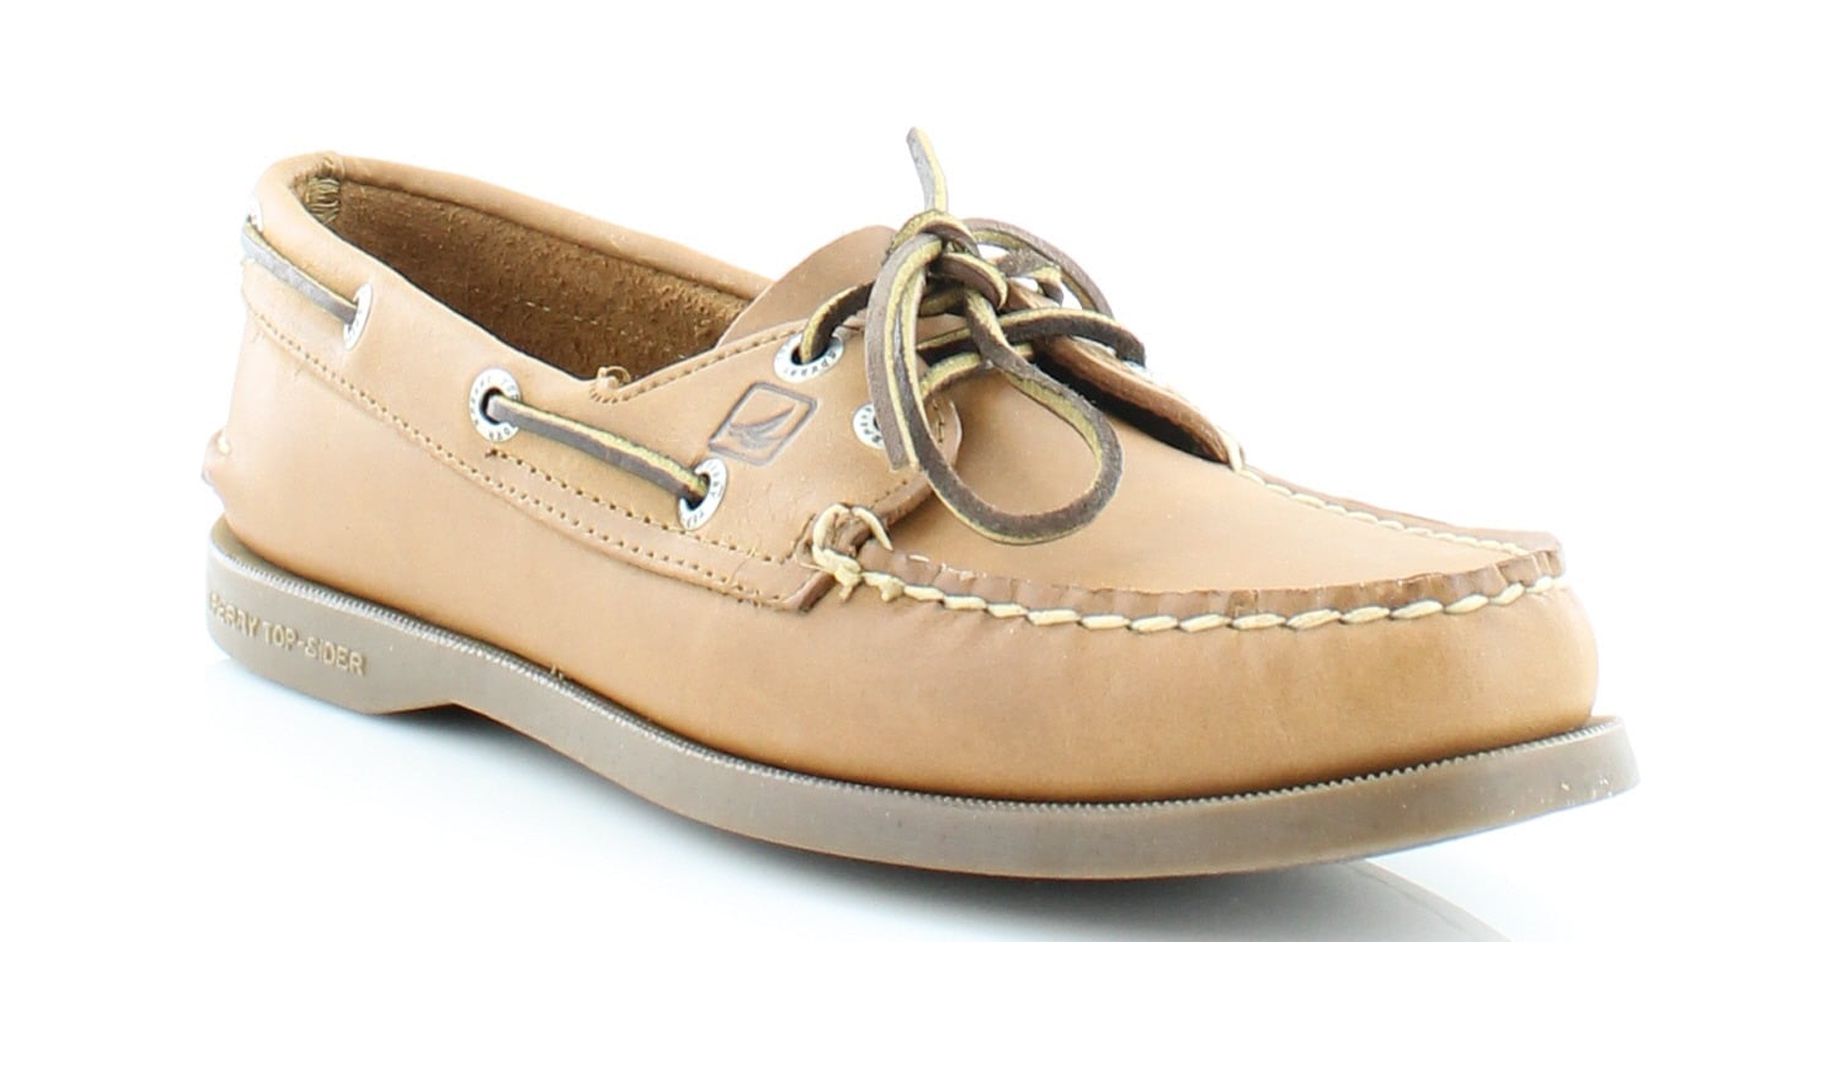 Sperry Top-Sider A/O 2-Eye Women's Loafers & Slip-Ons - image 1 of 5